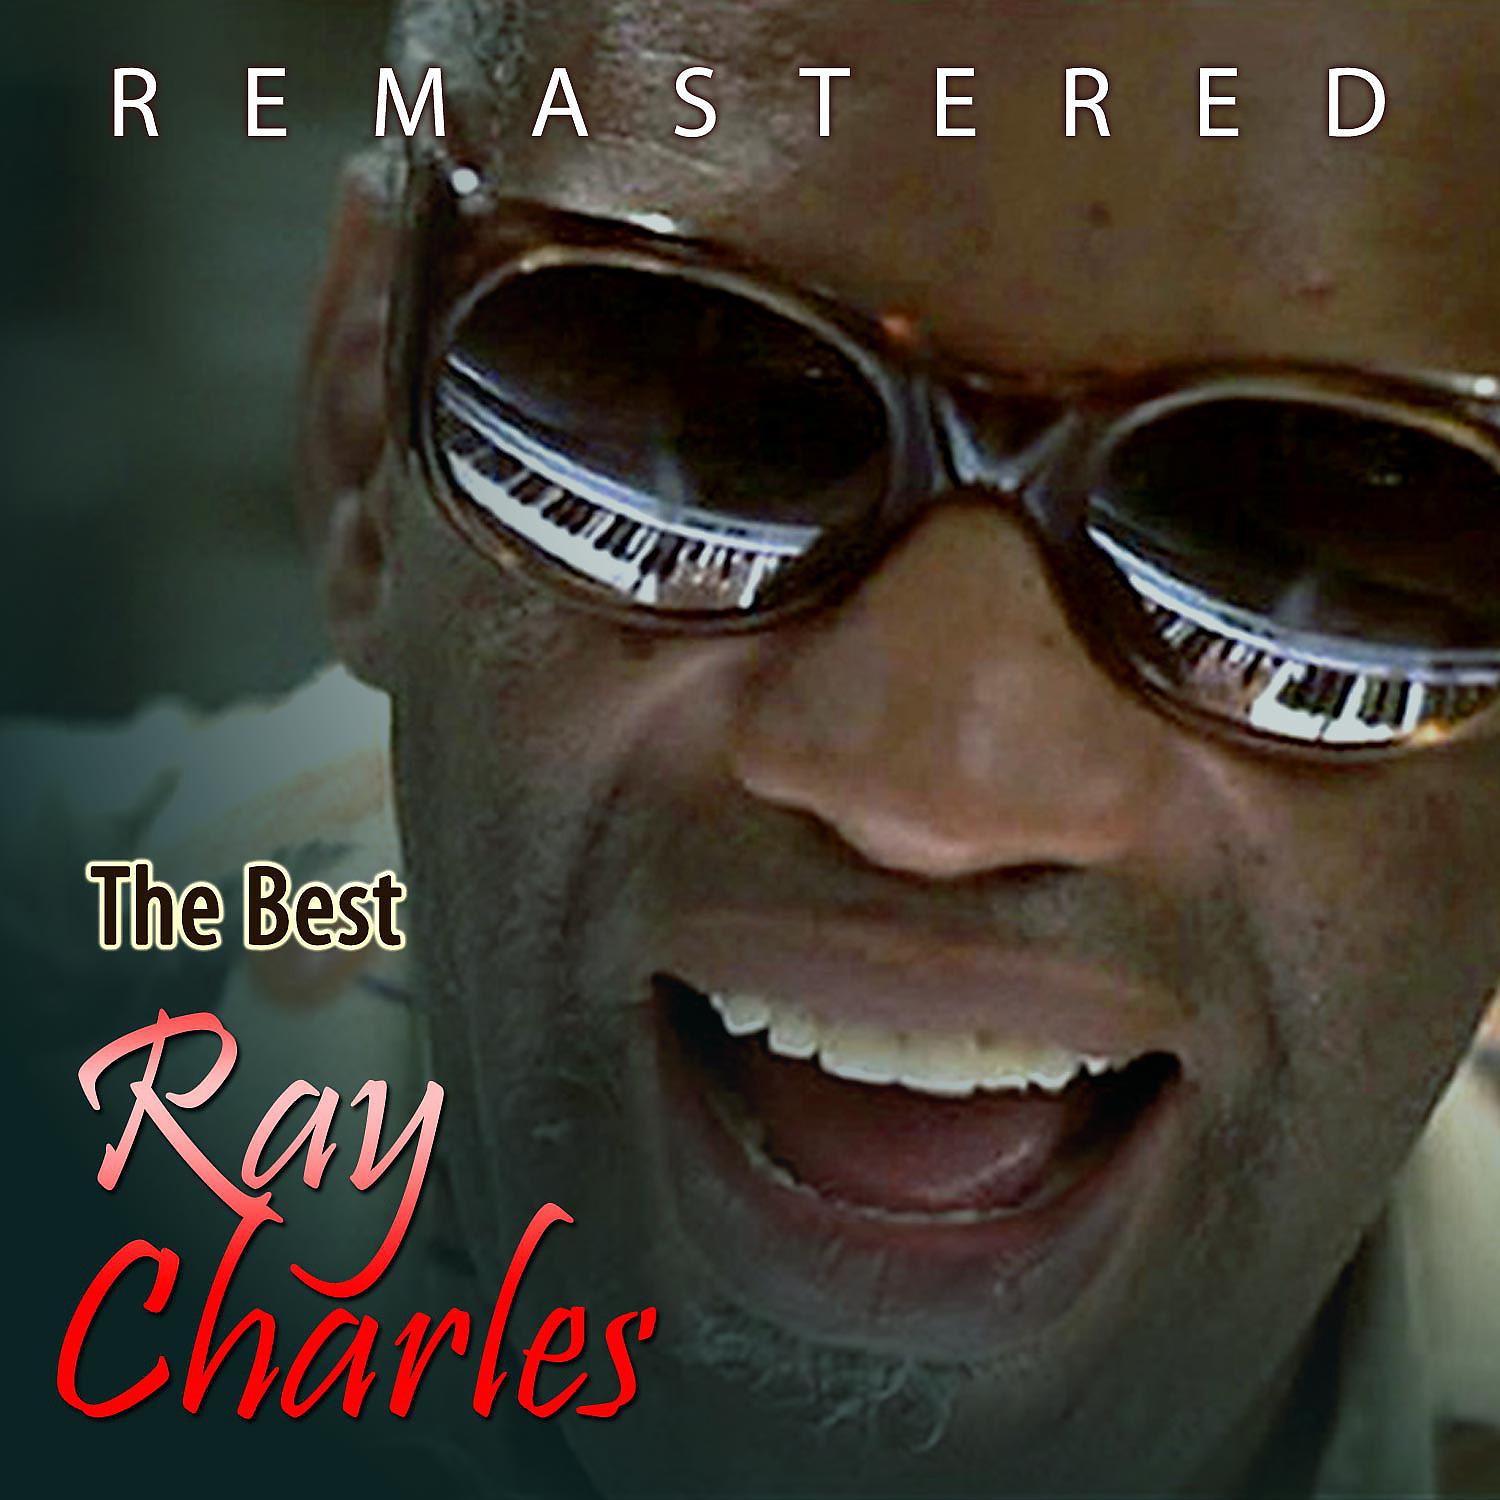 Постер альбома The Best of Ray Charles